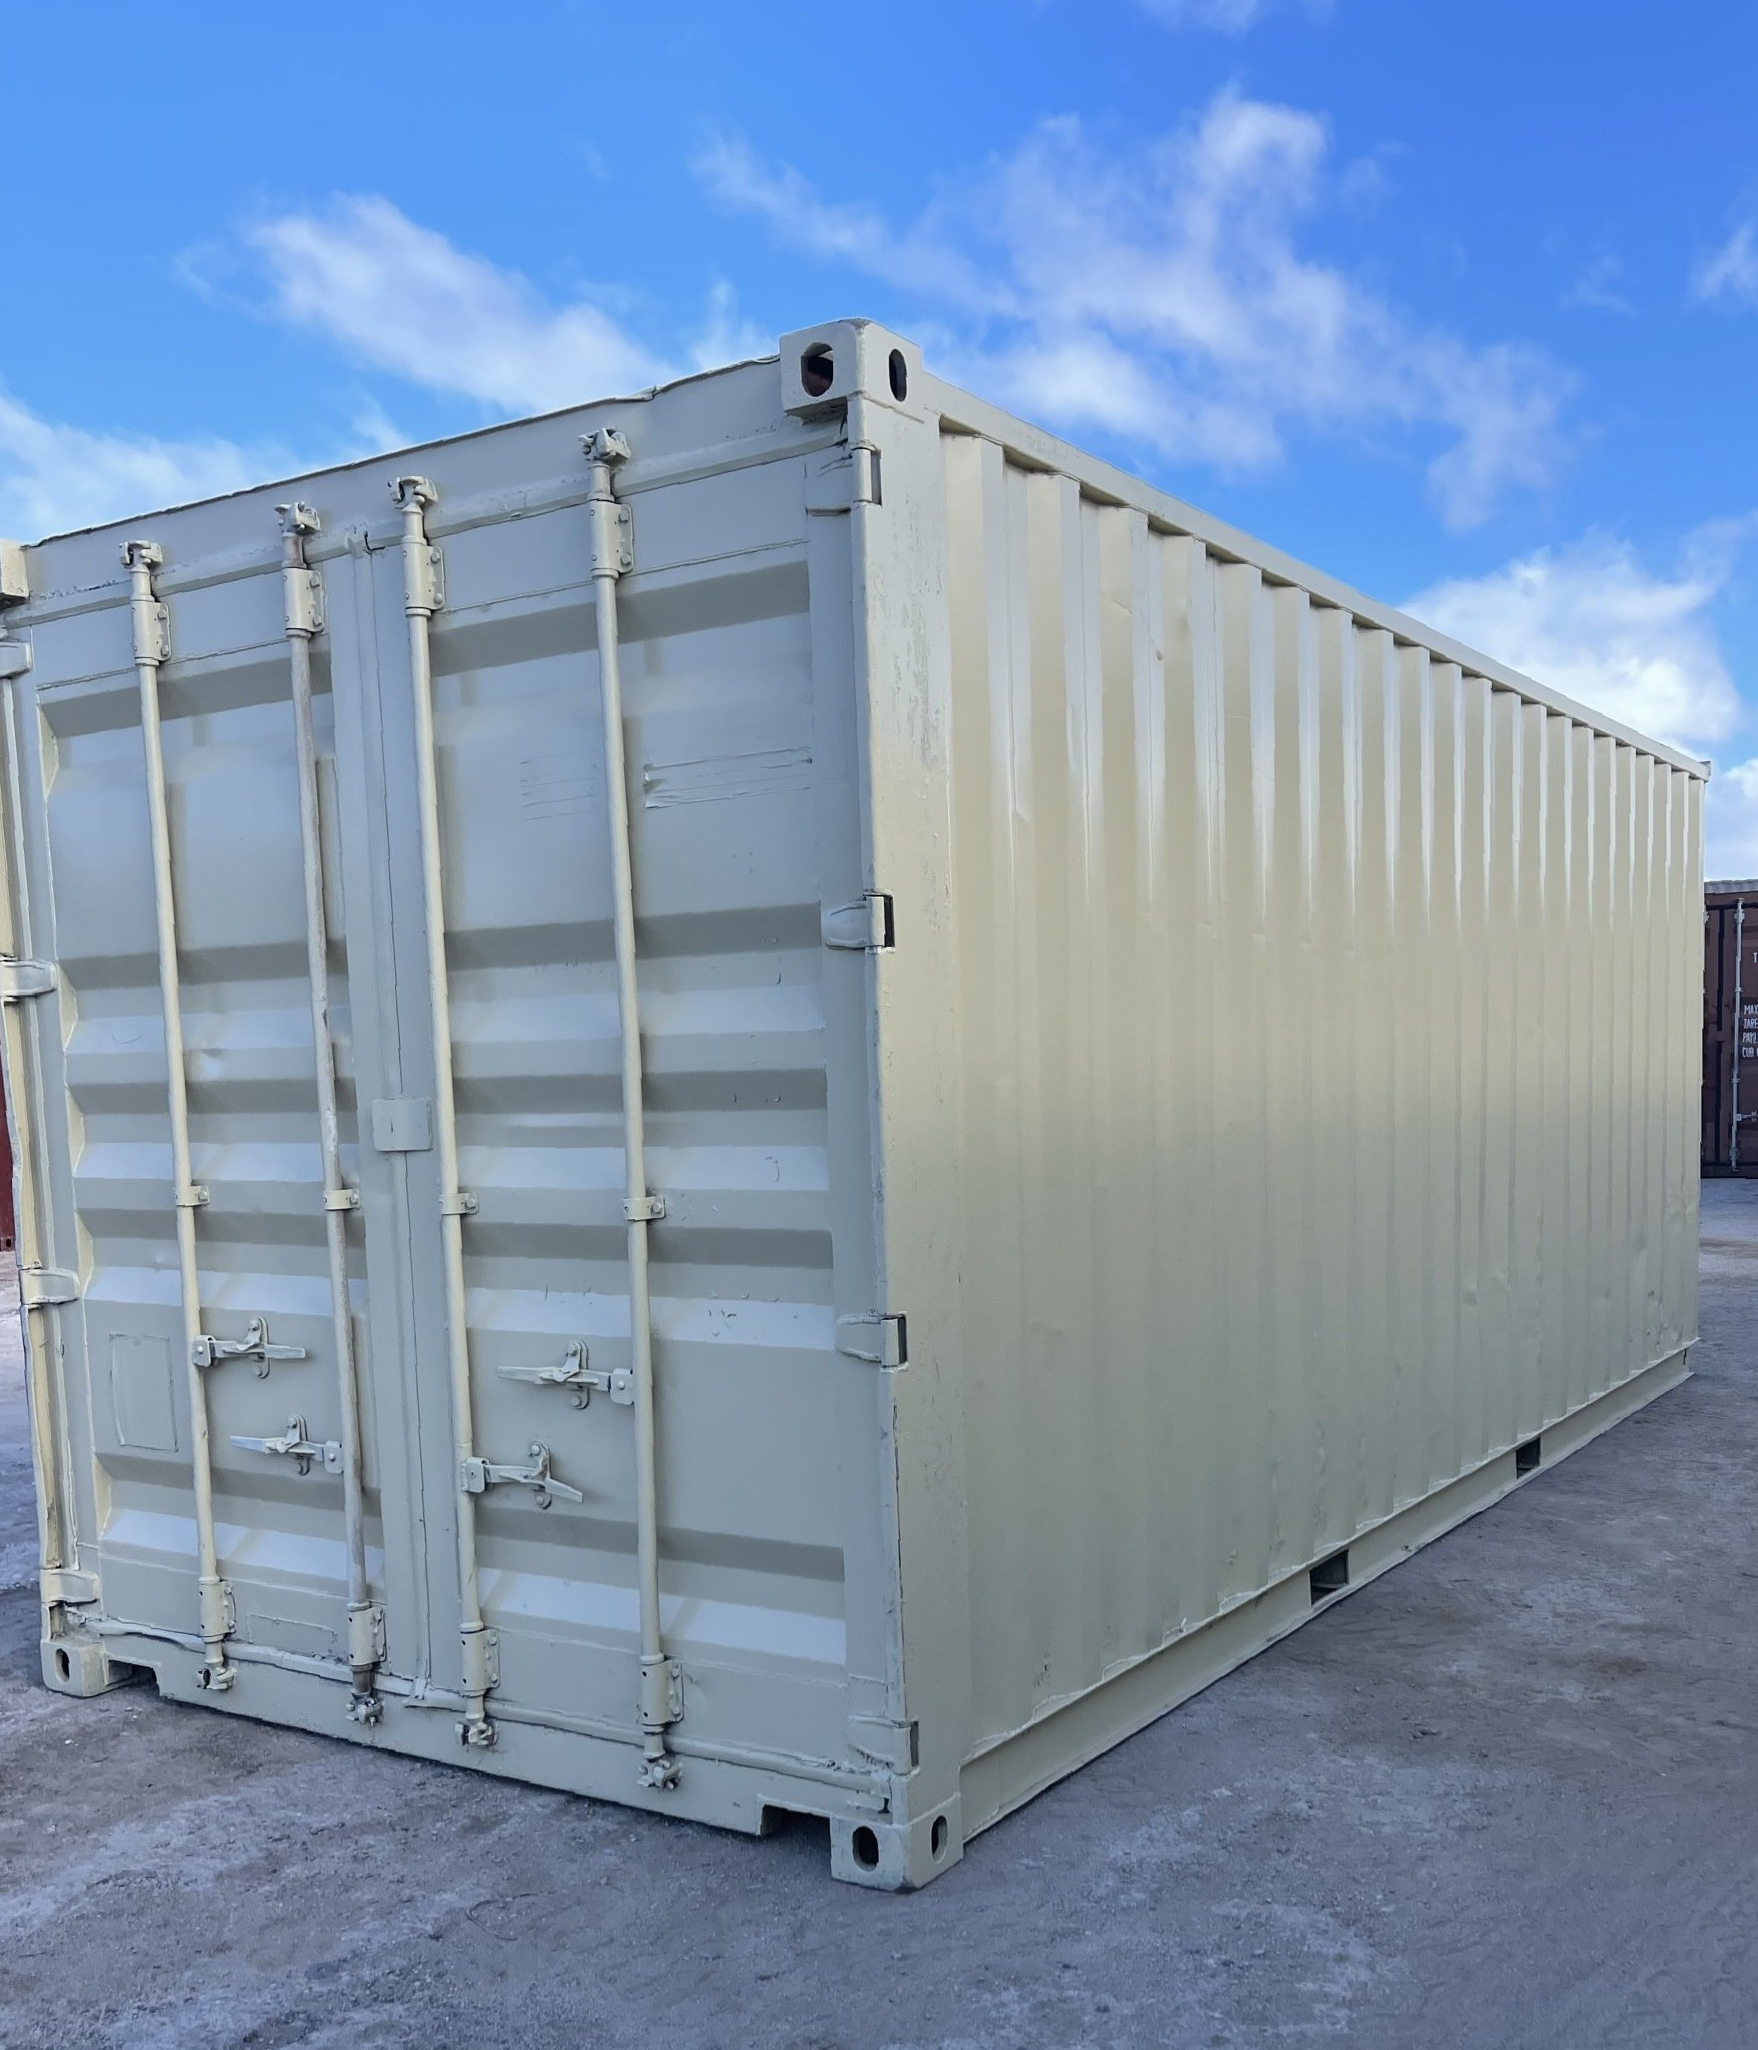 40' High Cube One Trip Shipping Container on Maui